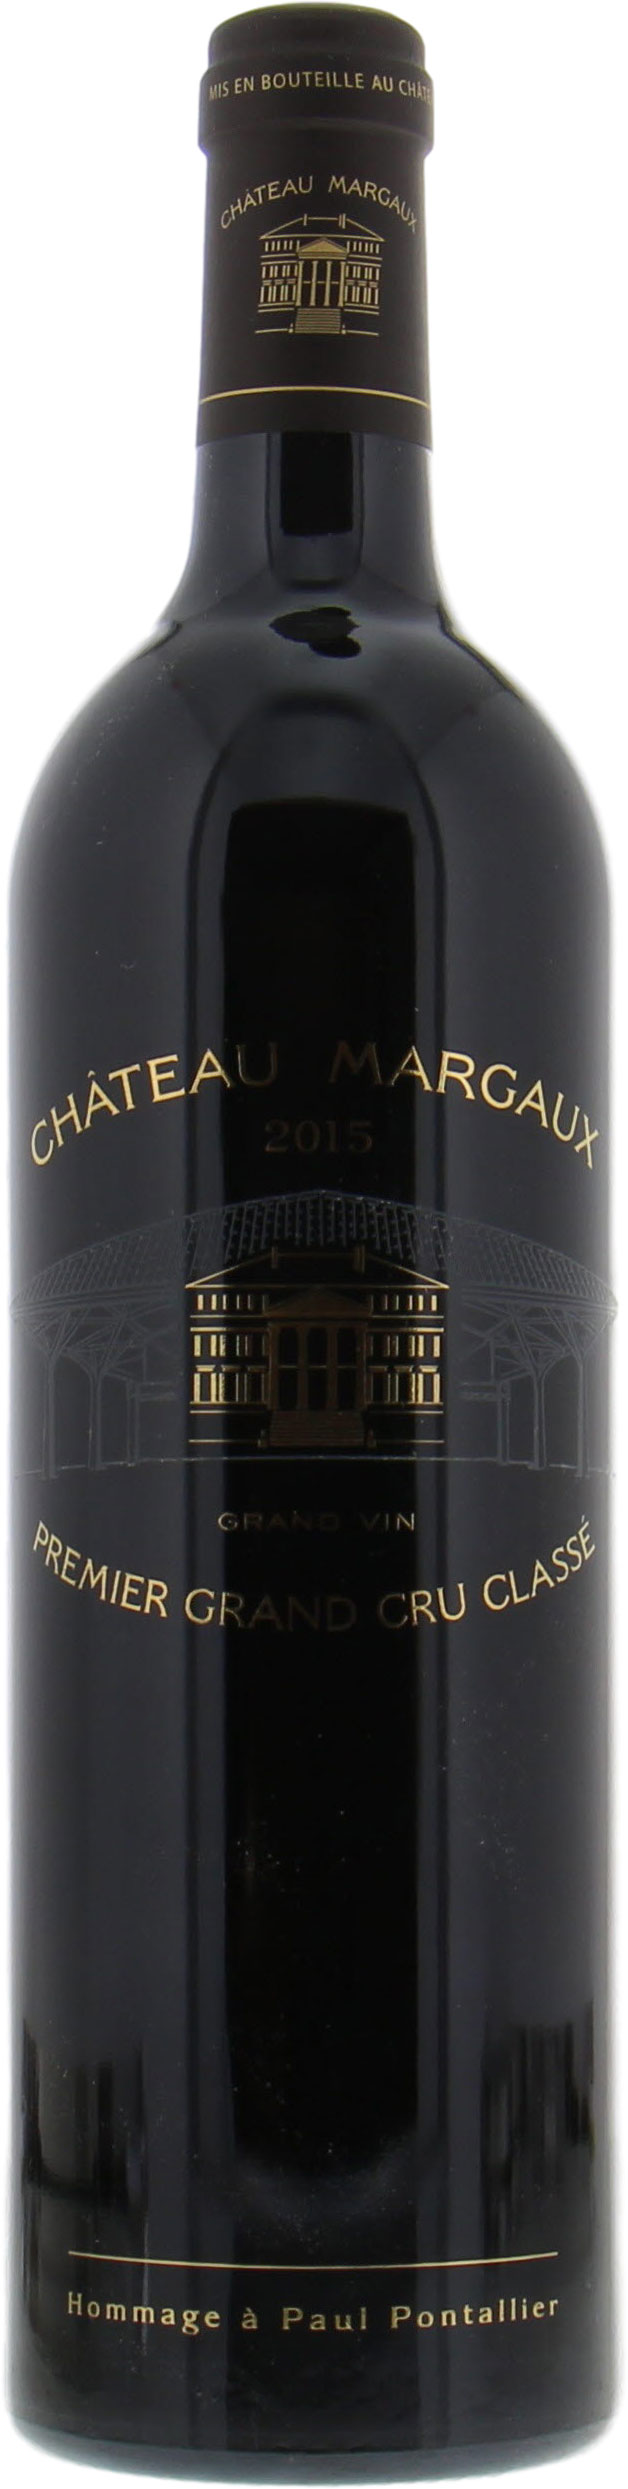 Chateau Margaux - Chateau Margaux 2015 From Original Wooden Case